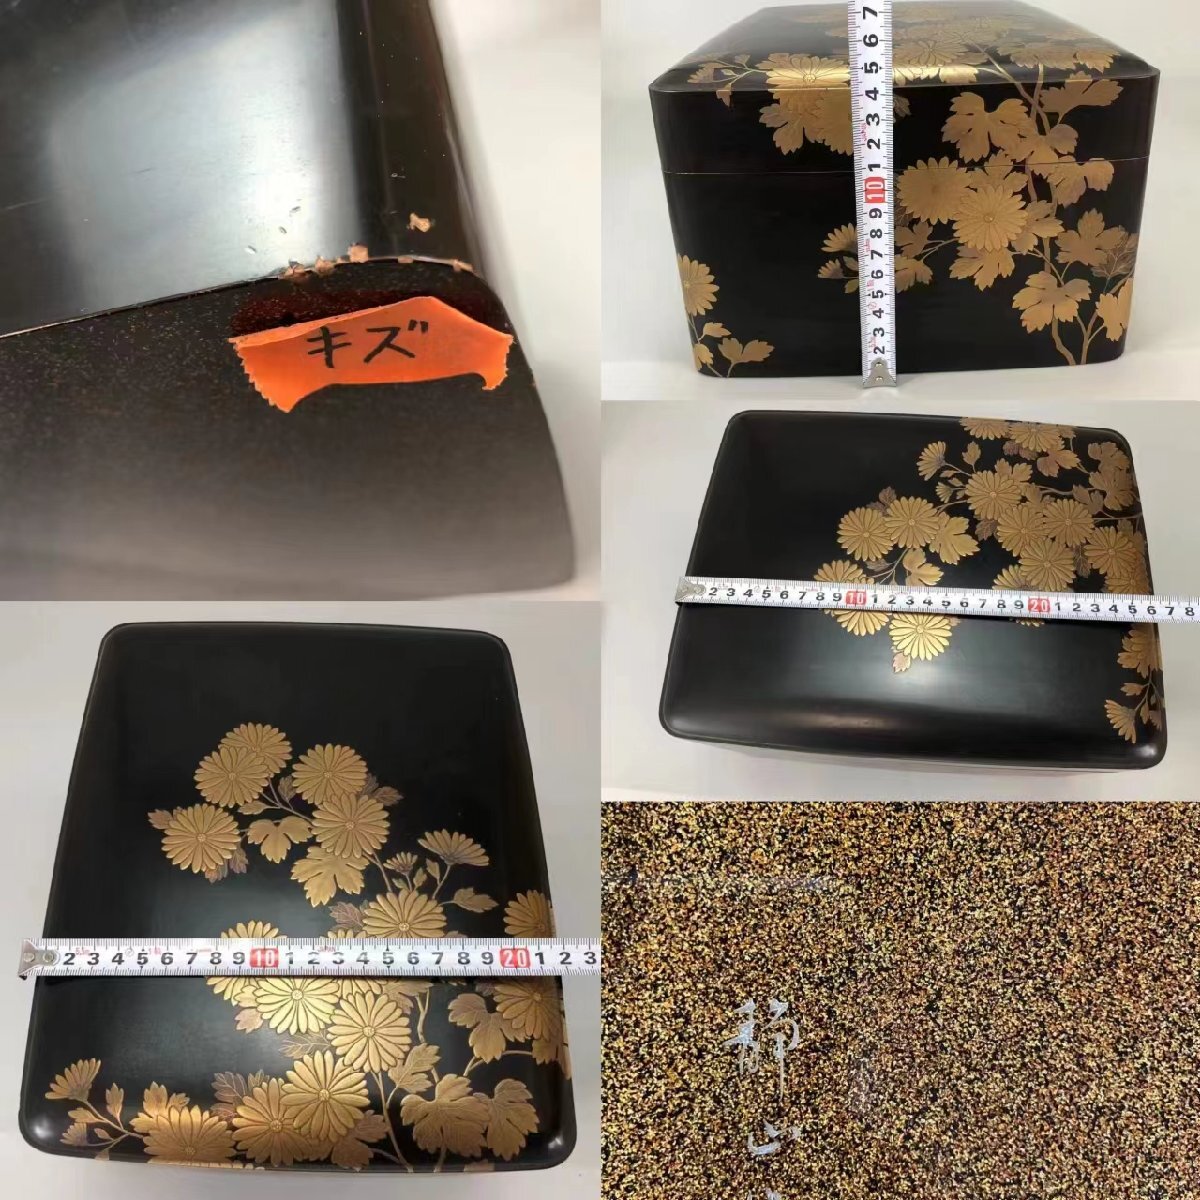 M0103B Aizu paint quiet mountain work lacqering small box . lacqering inside pear ground cover thing thing go in box to hold letters library writing . lacquer ware lacquer industrial arts scratch equipped 